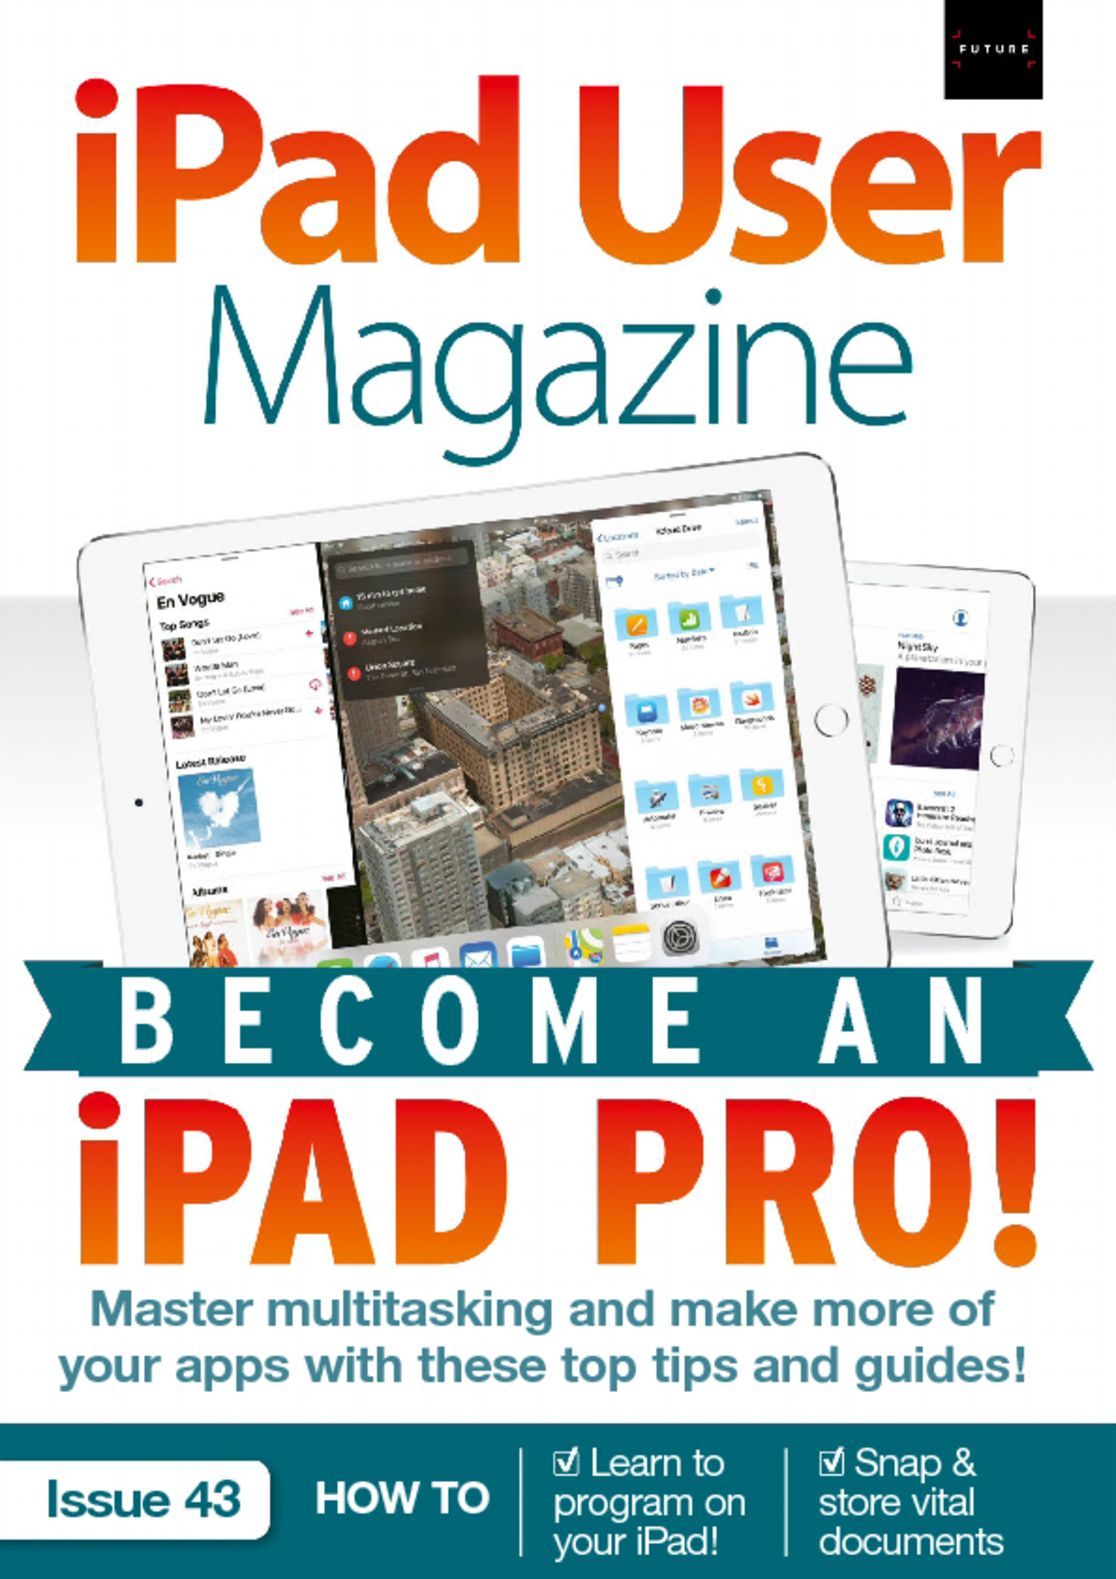 iPad Pro User Guide And Tutorial With Manual PDF 2017 for